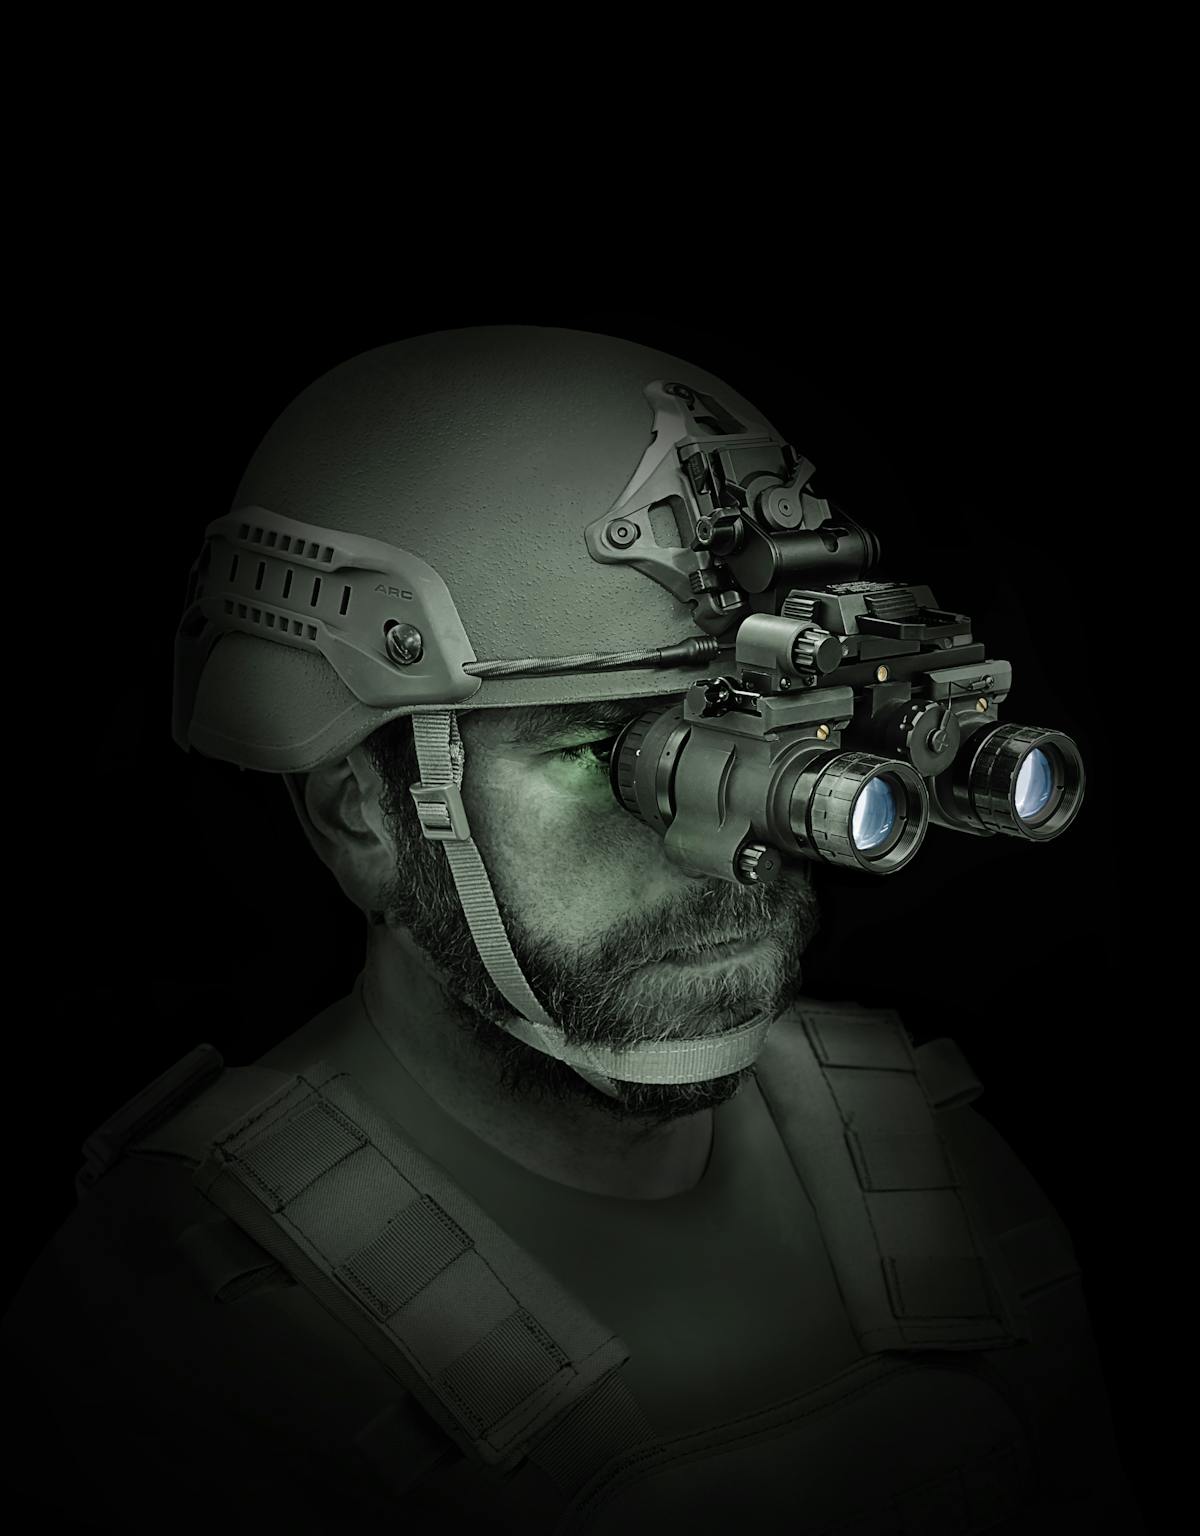 The Binocular/Monocular Night Vision Device with Gain Control (BMNVDG) from Night Vision Devices